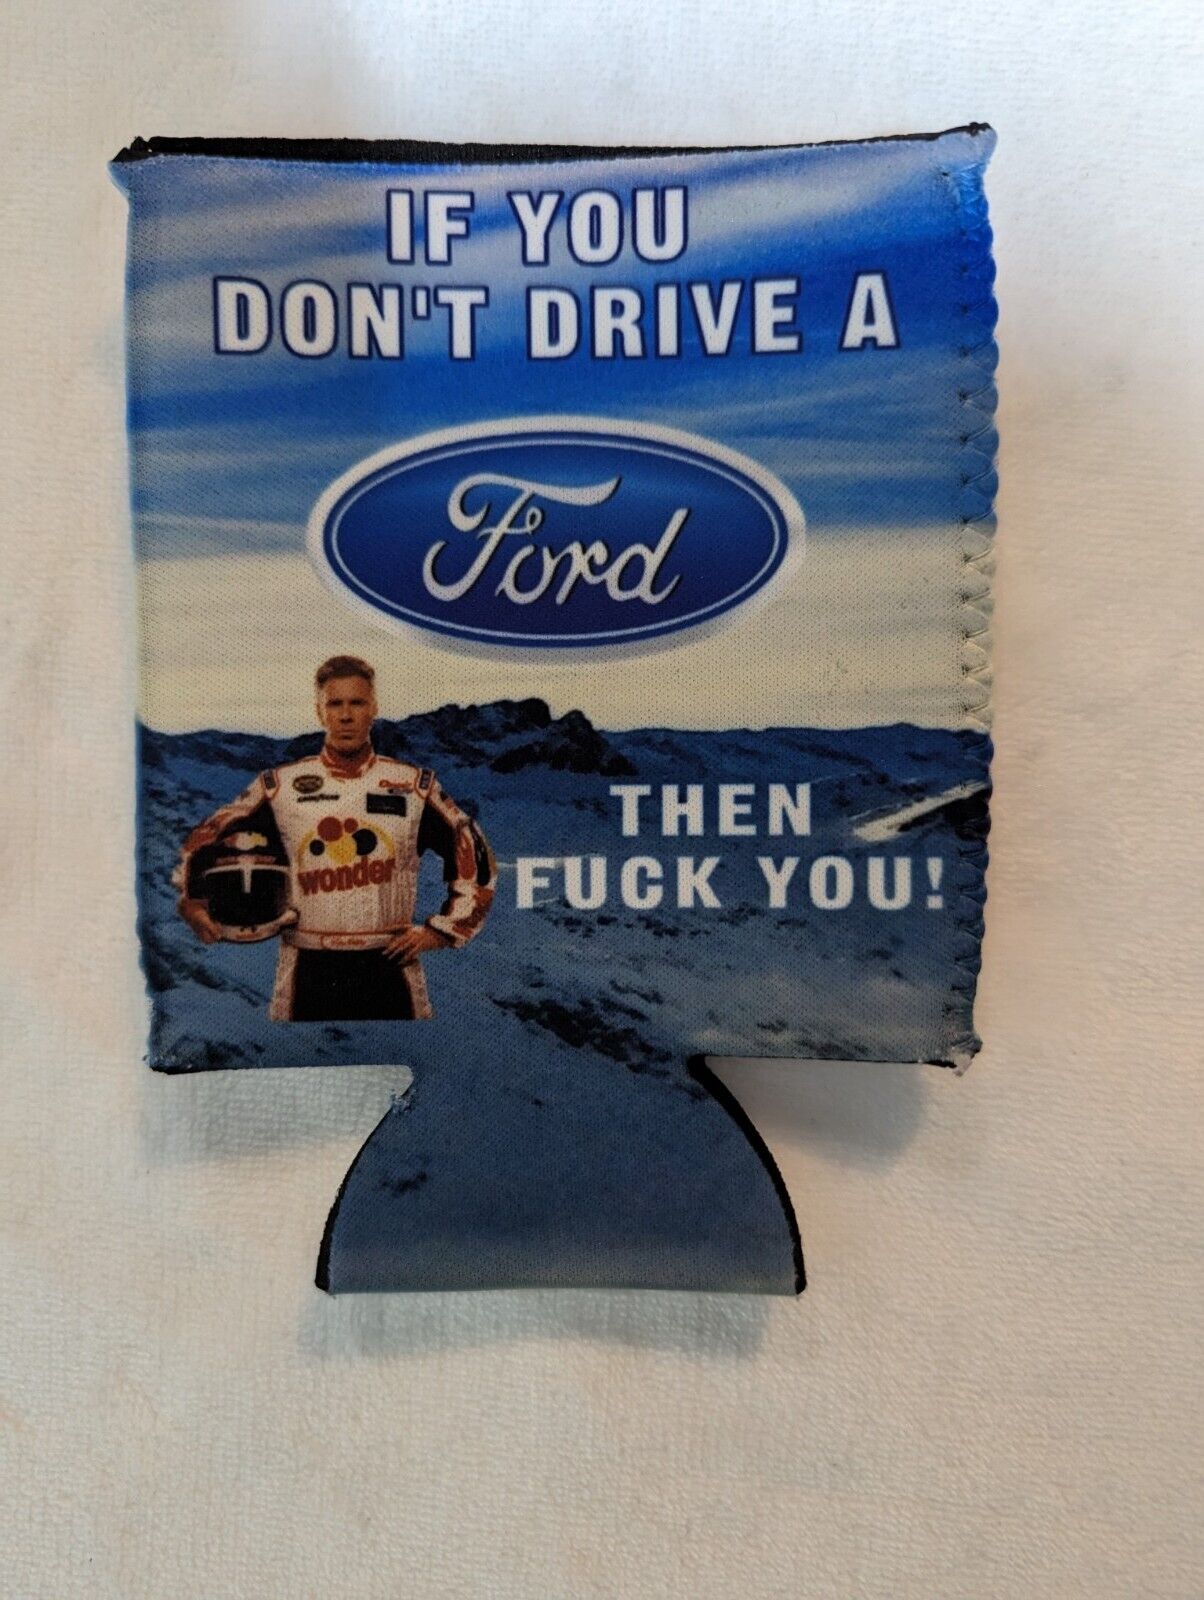 One Ford truck Beer pop soda can koozie cooler river camping kayaking fishing